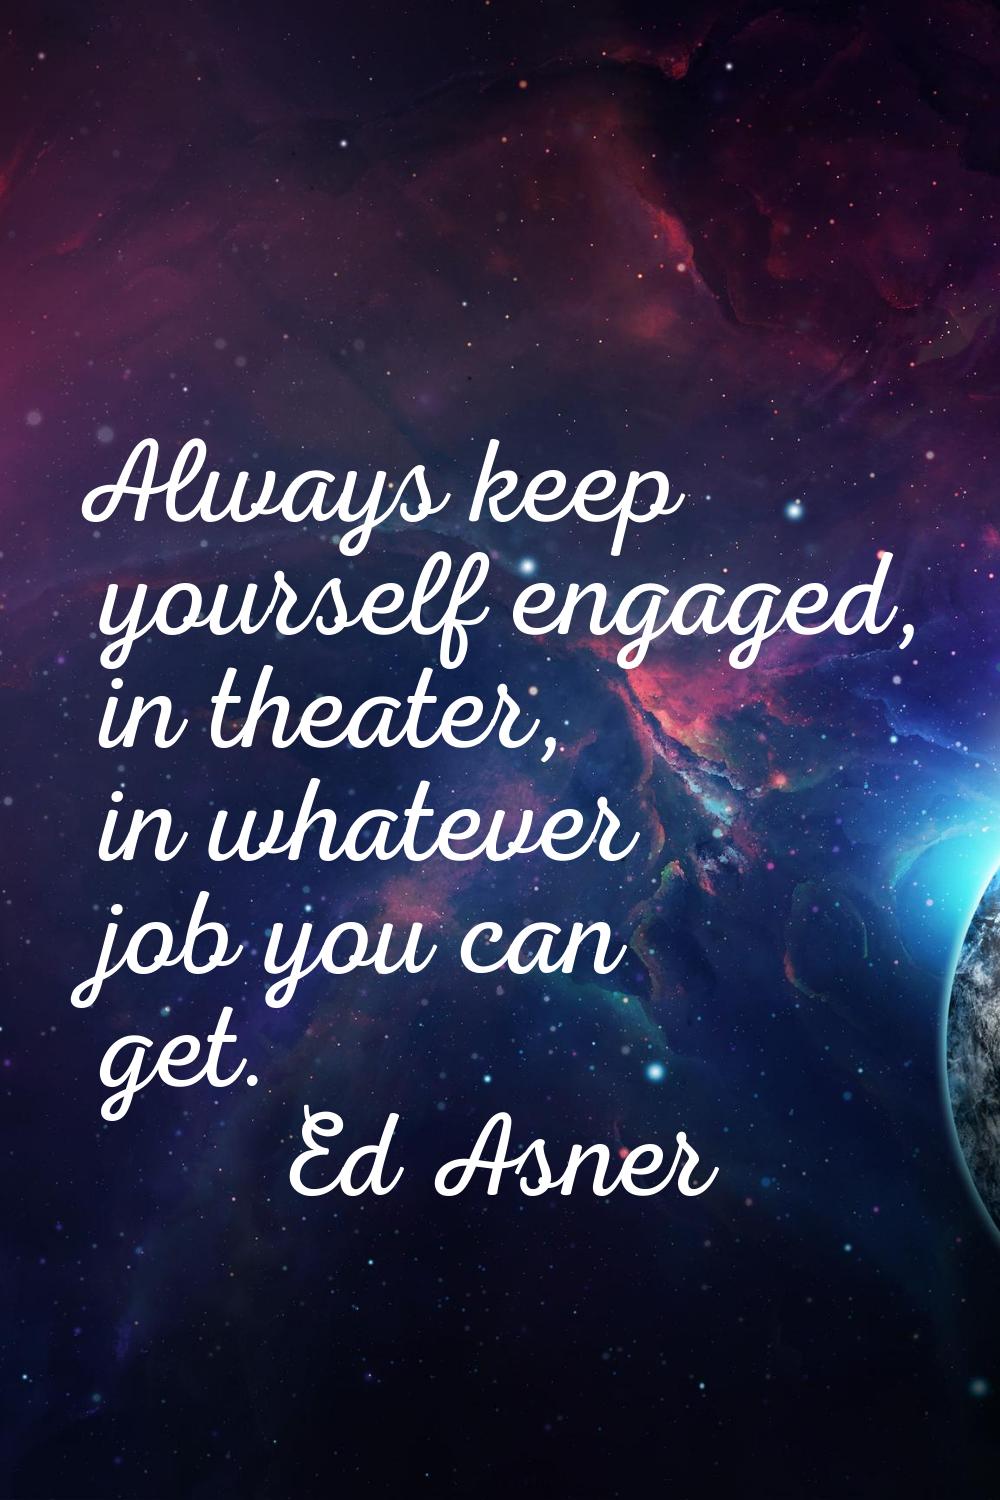 Always keep yourself engaged, in theater, in whatever job you can get.